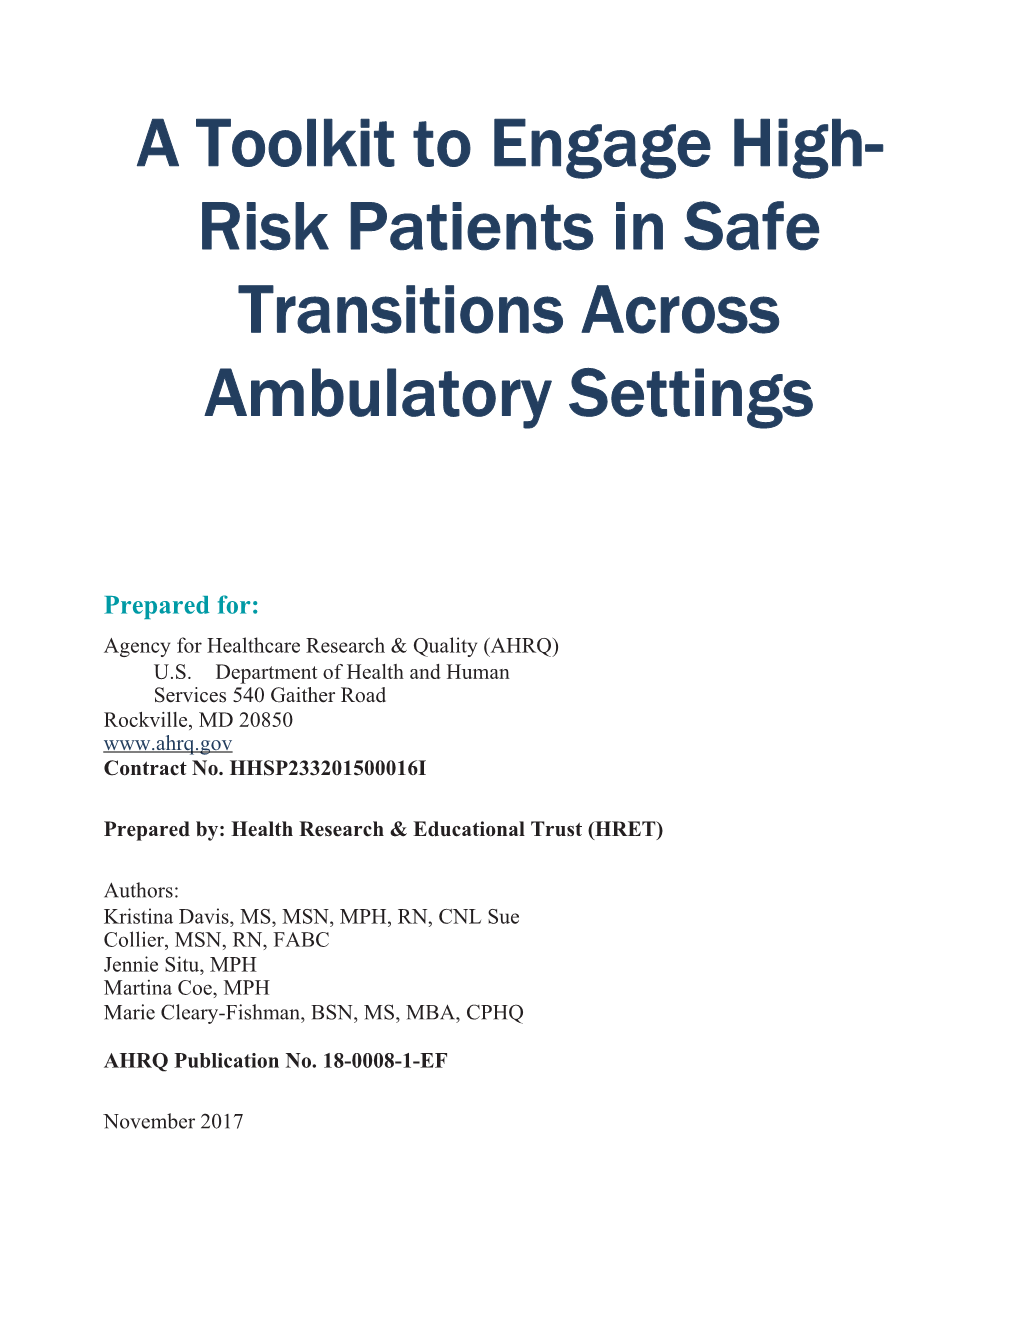 A Toolkit to Engage High-Risk Patients in Safe Transitions: Final Report